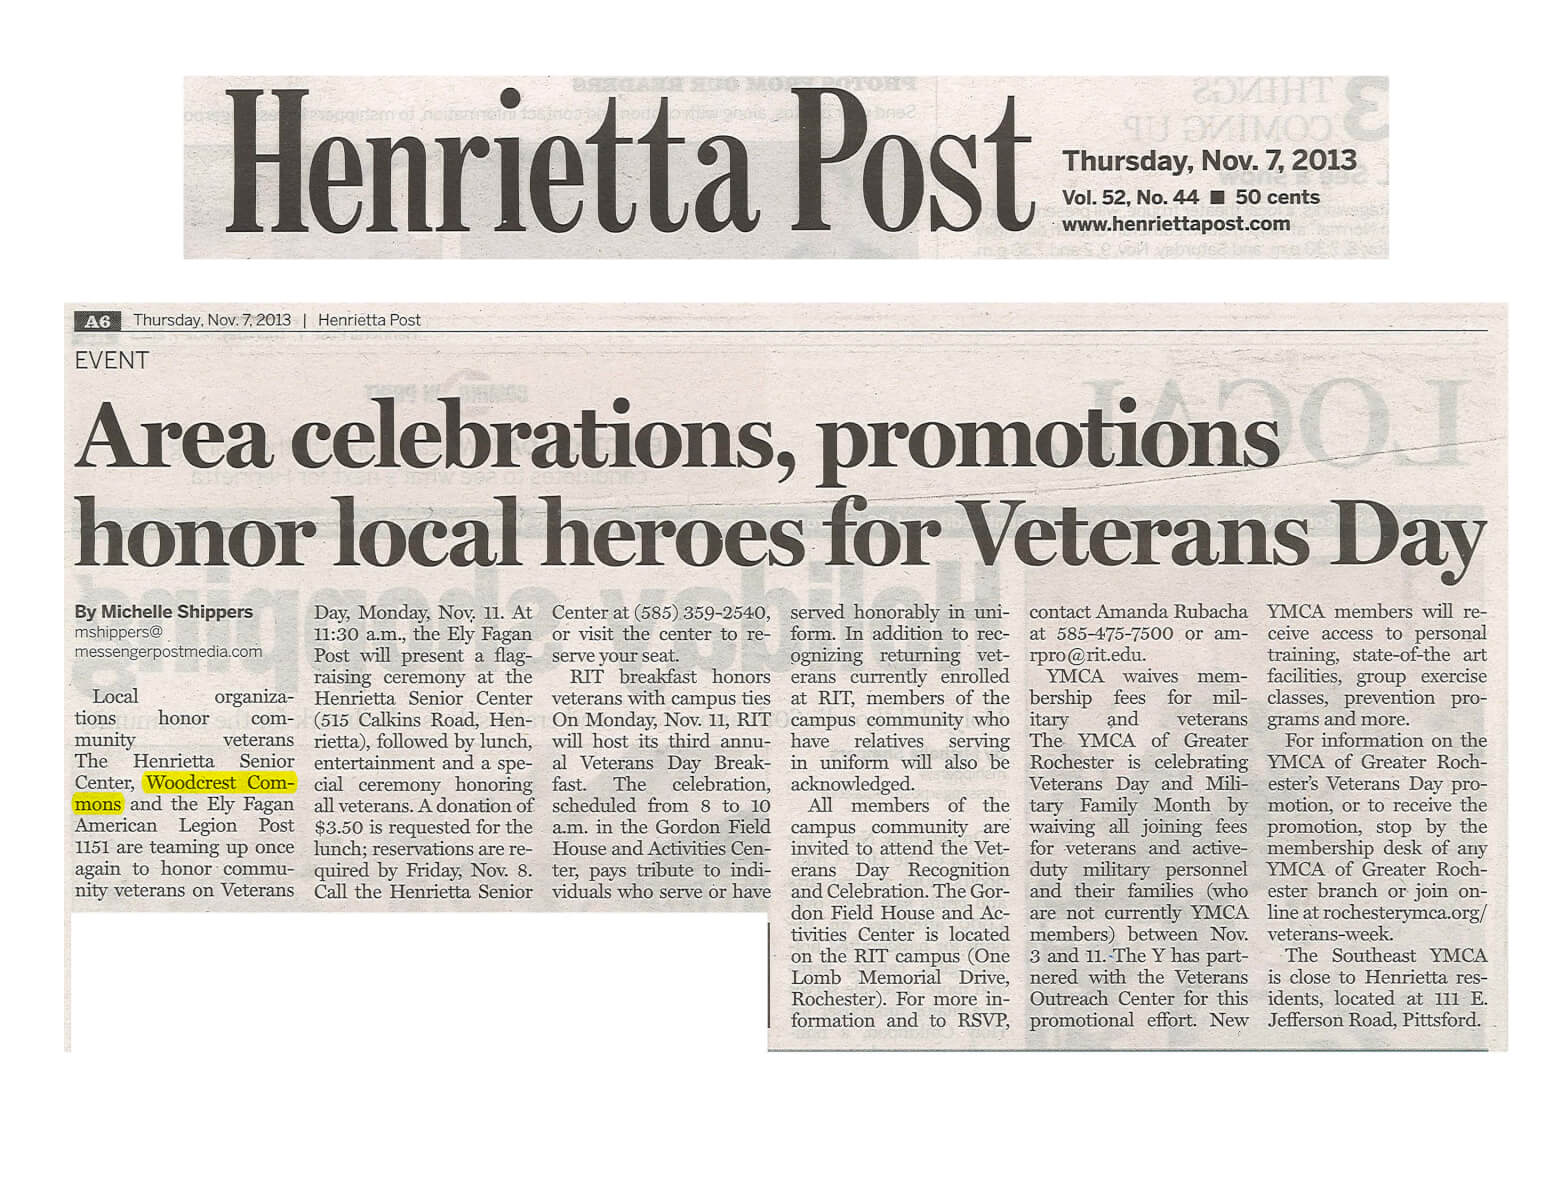 Woodcrest Commons celebrates Veterans Day article in the Henrietta Post November 2013